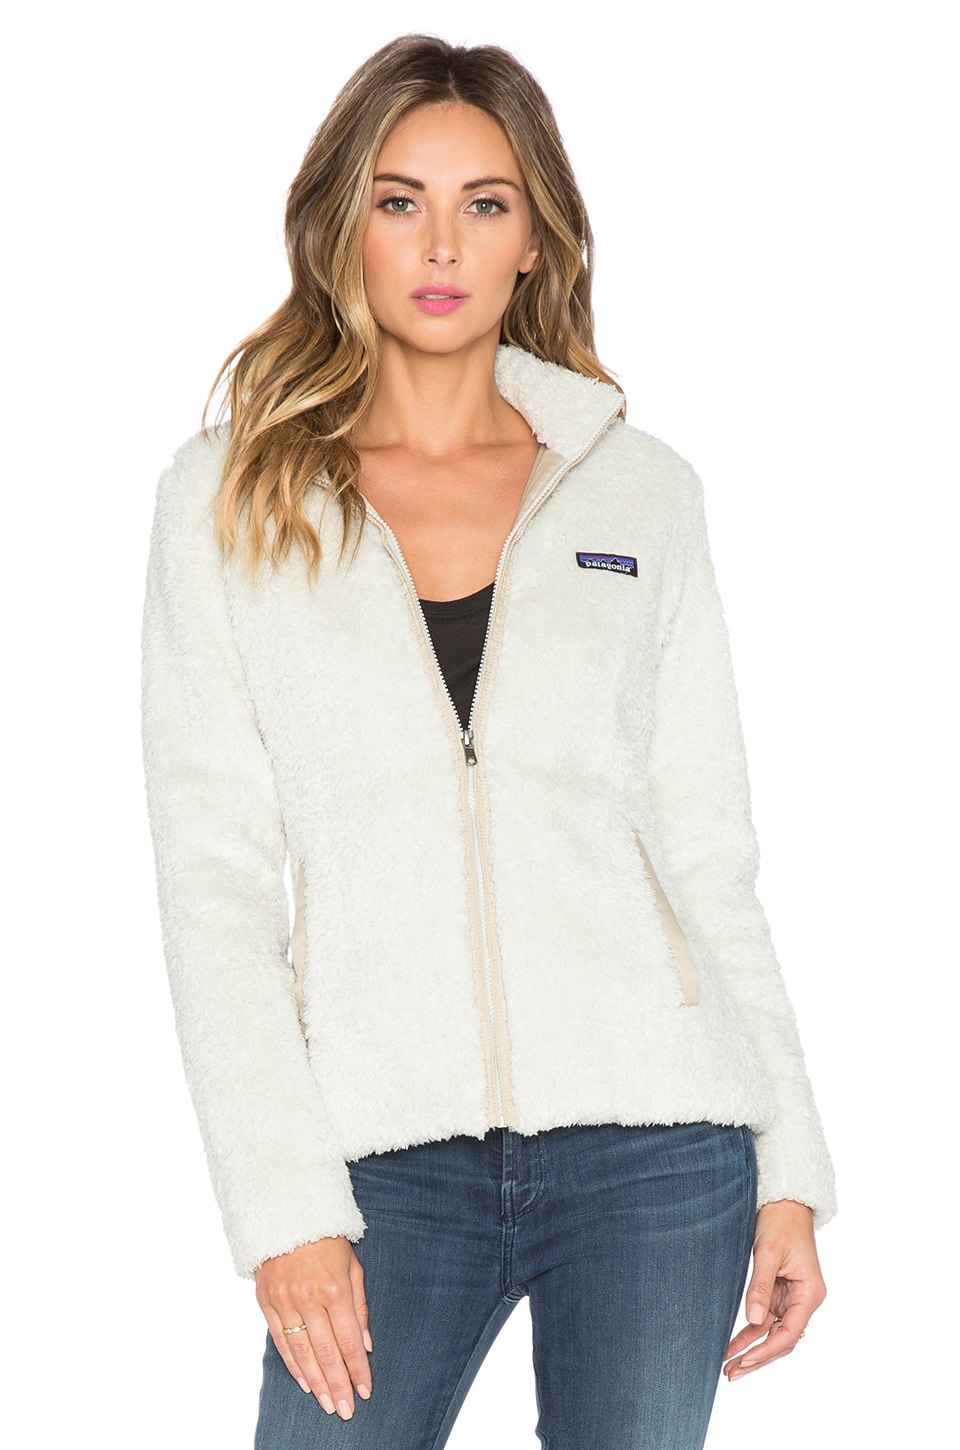 Patagonia Los Gatos Faux Fur Jacket in Bleached Stone | REVOLVE